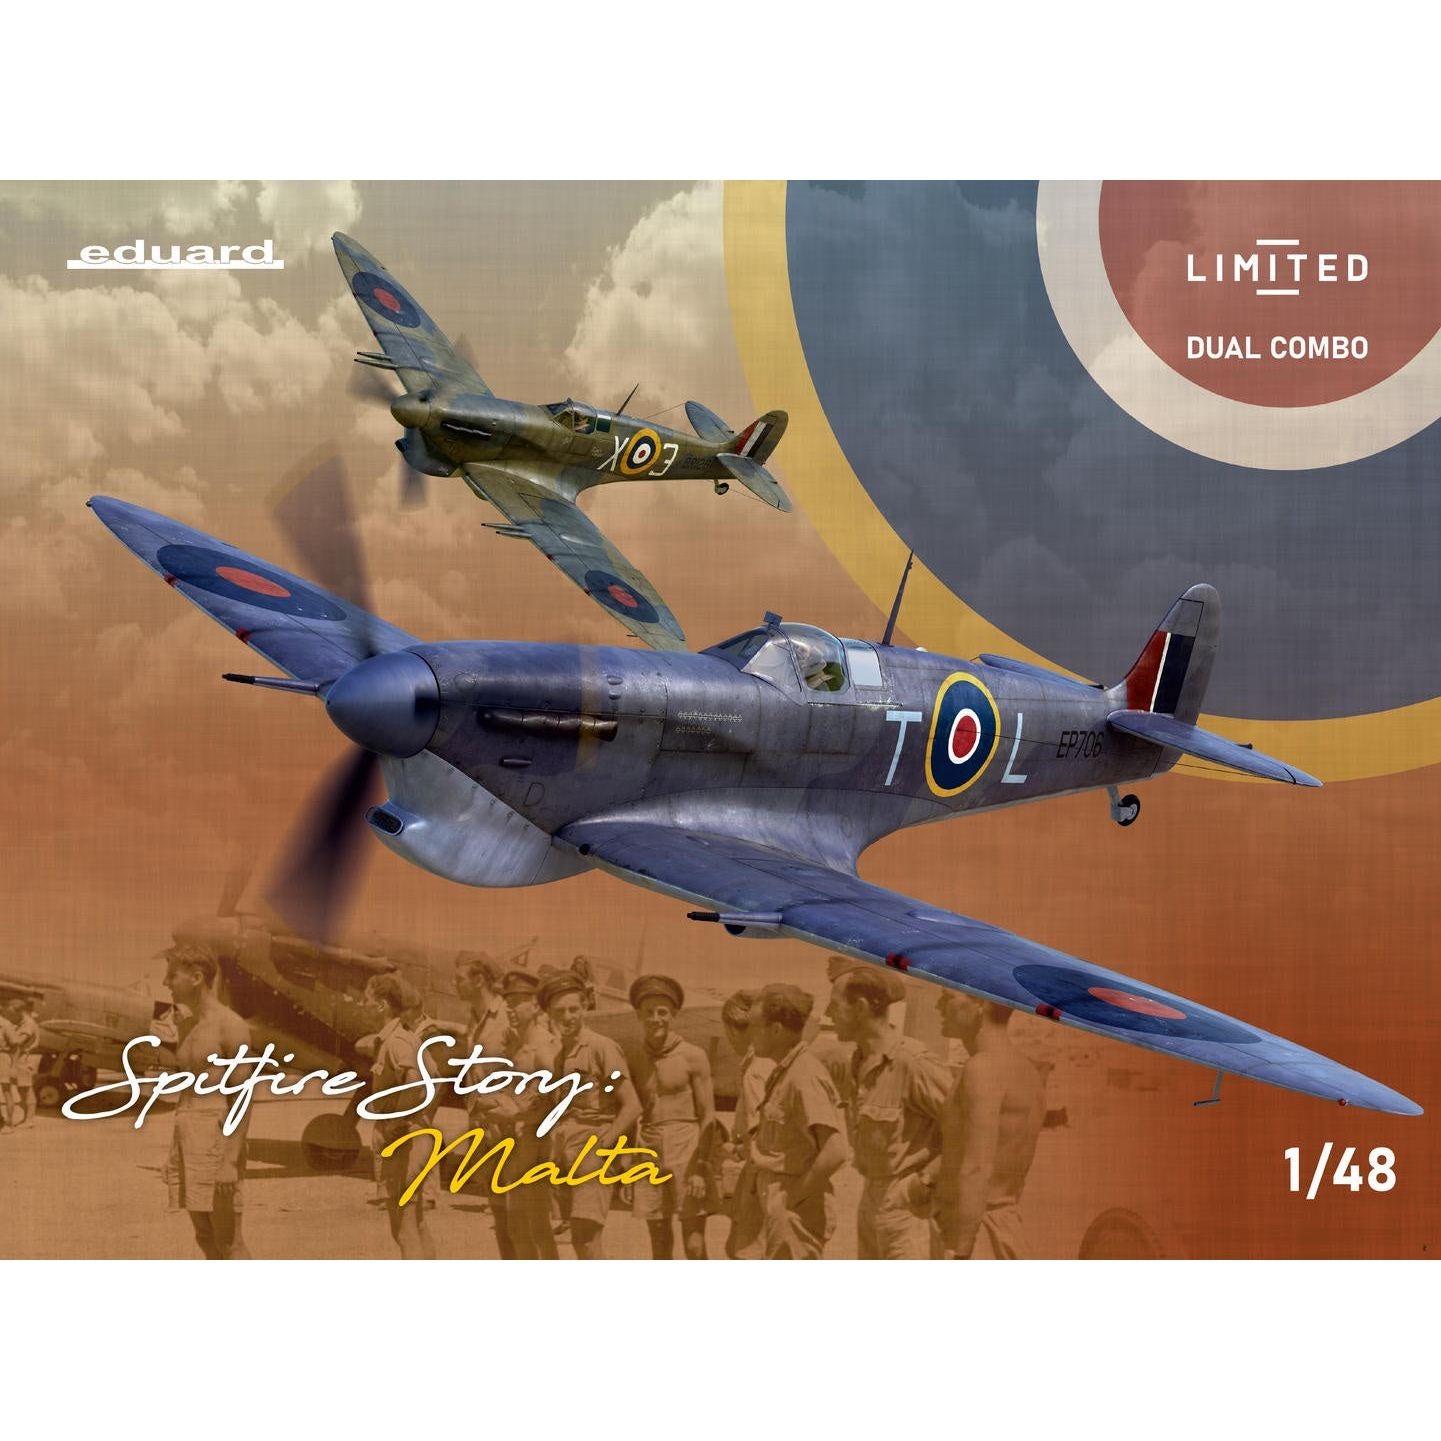 Spitfire Story: Malta Duo Combo [Limited Edition] 1/48 #11172 by Eduard